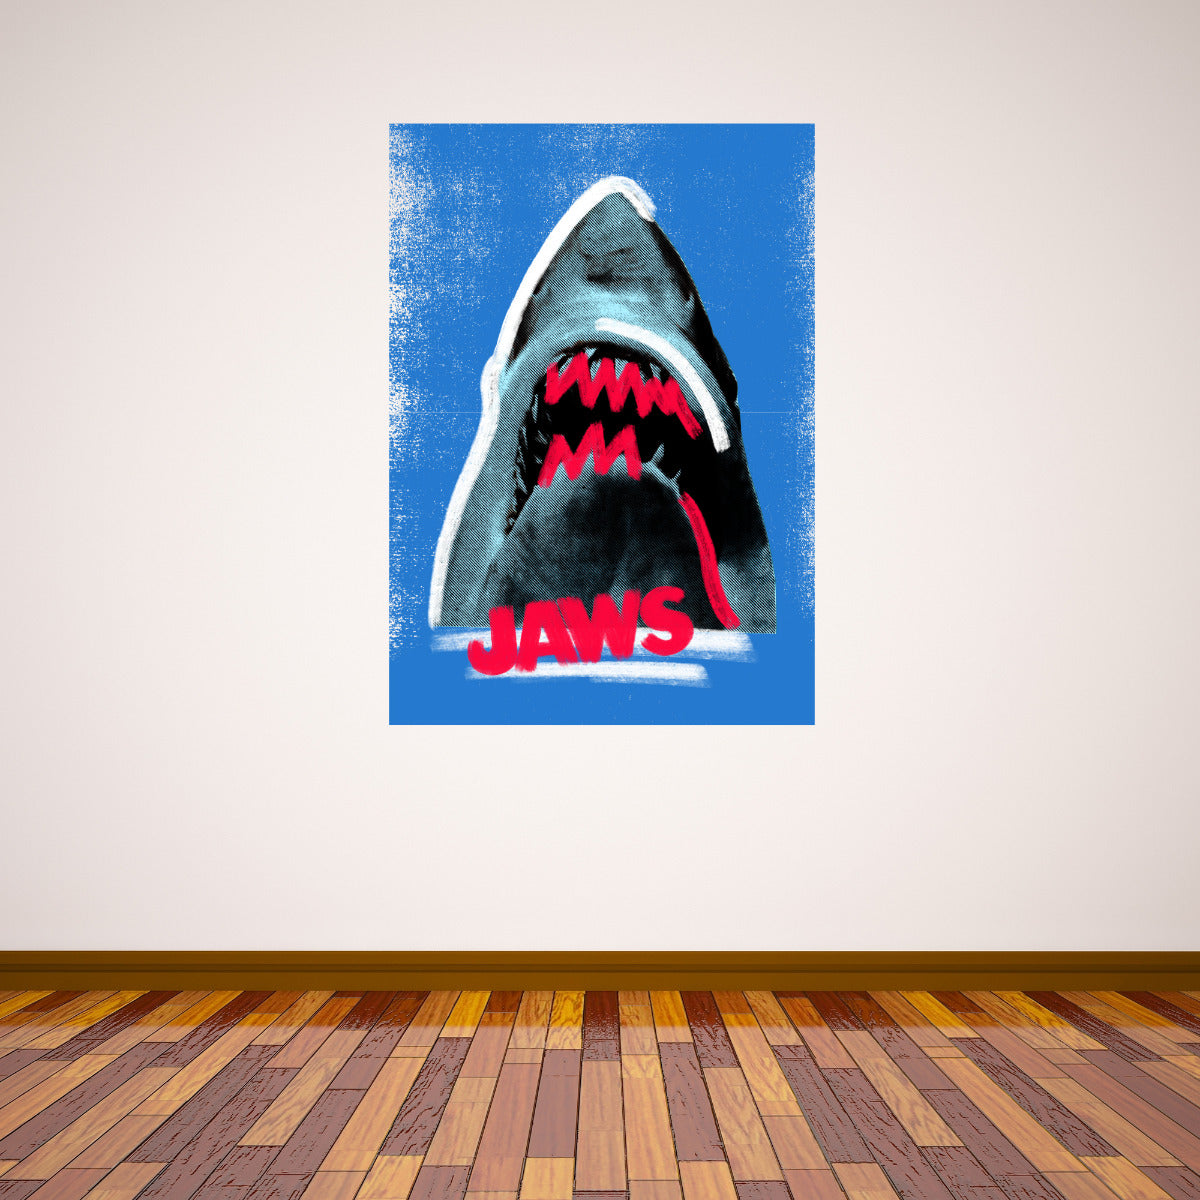 Jaws Wall Sticker Red Paint Shark Graphic